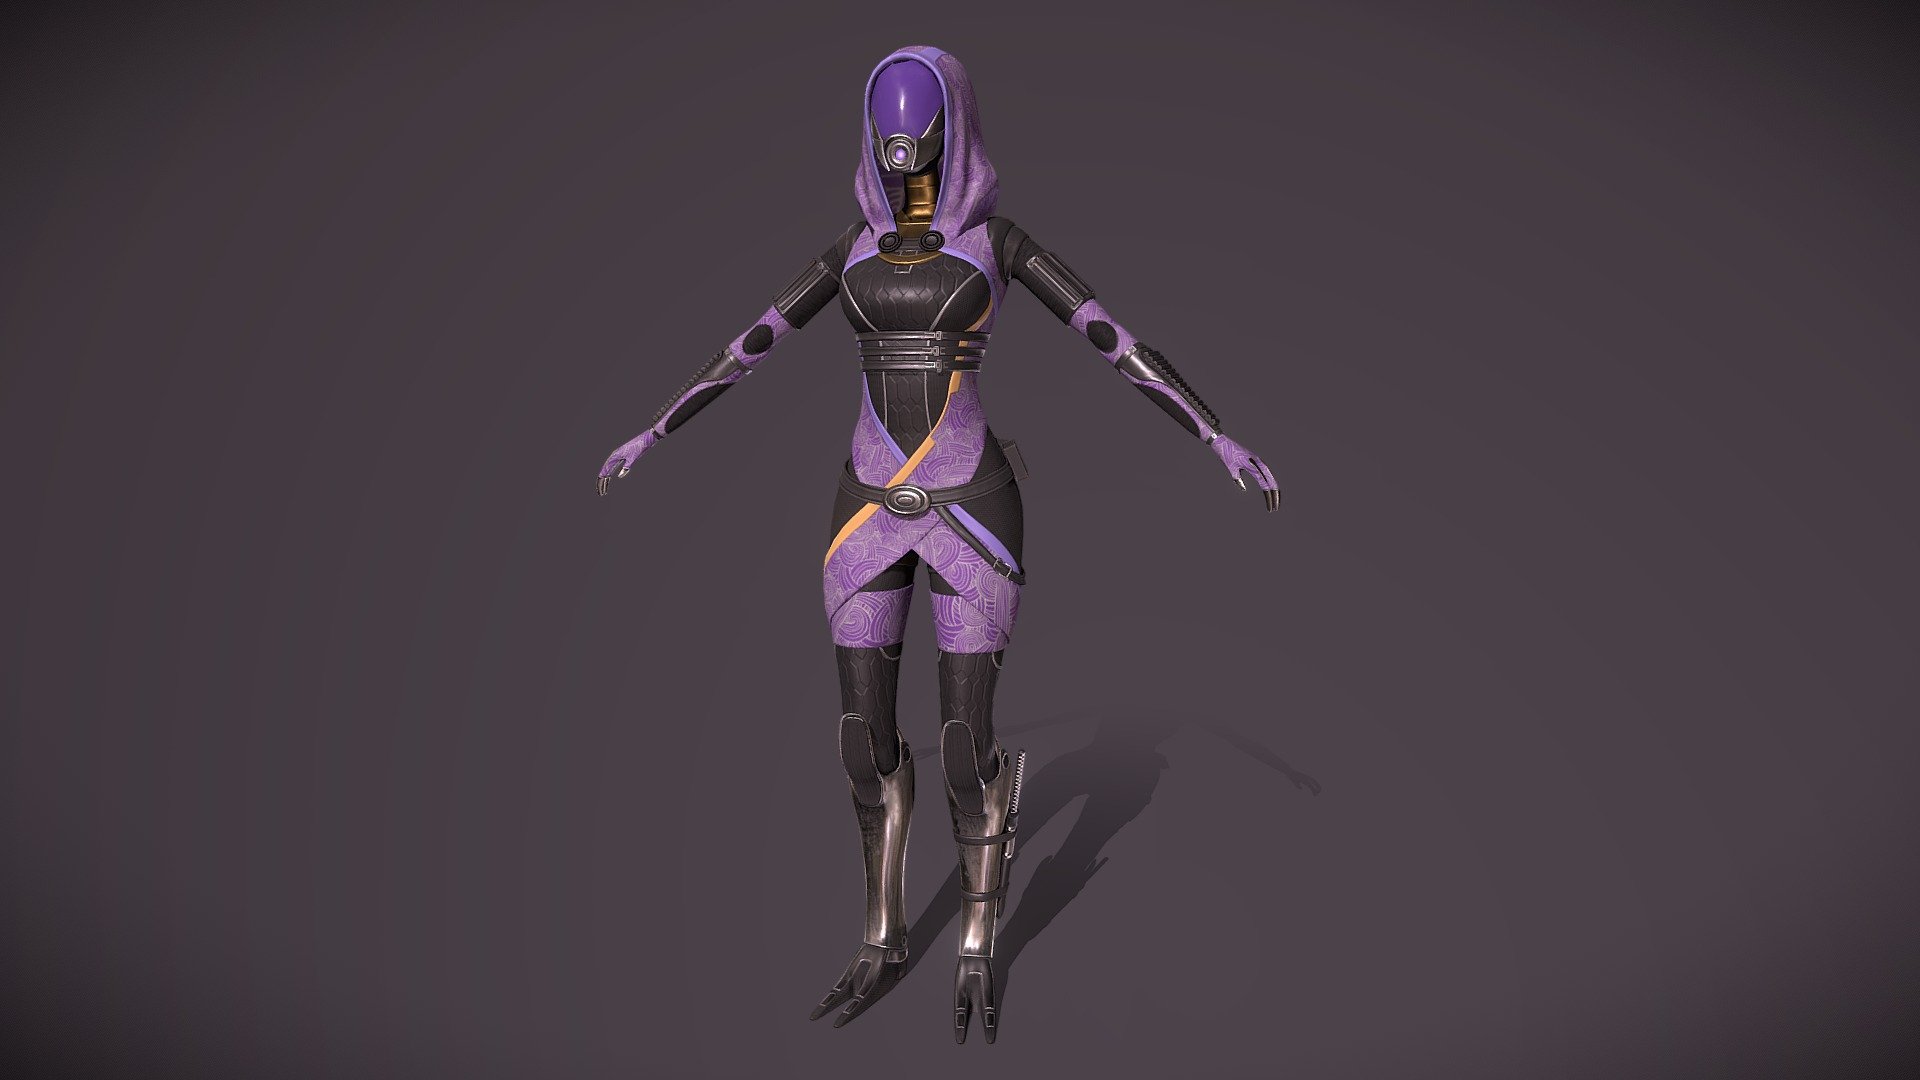 Alien character from Mass Effect (c) game series - Tali’Zorah nar Rayya - 3D model by Lily (@irinab) 3d model